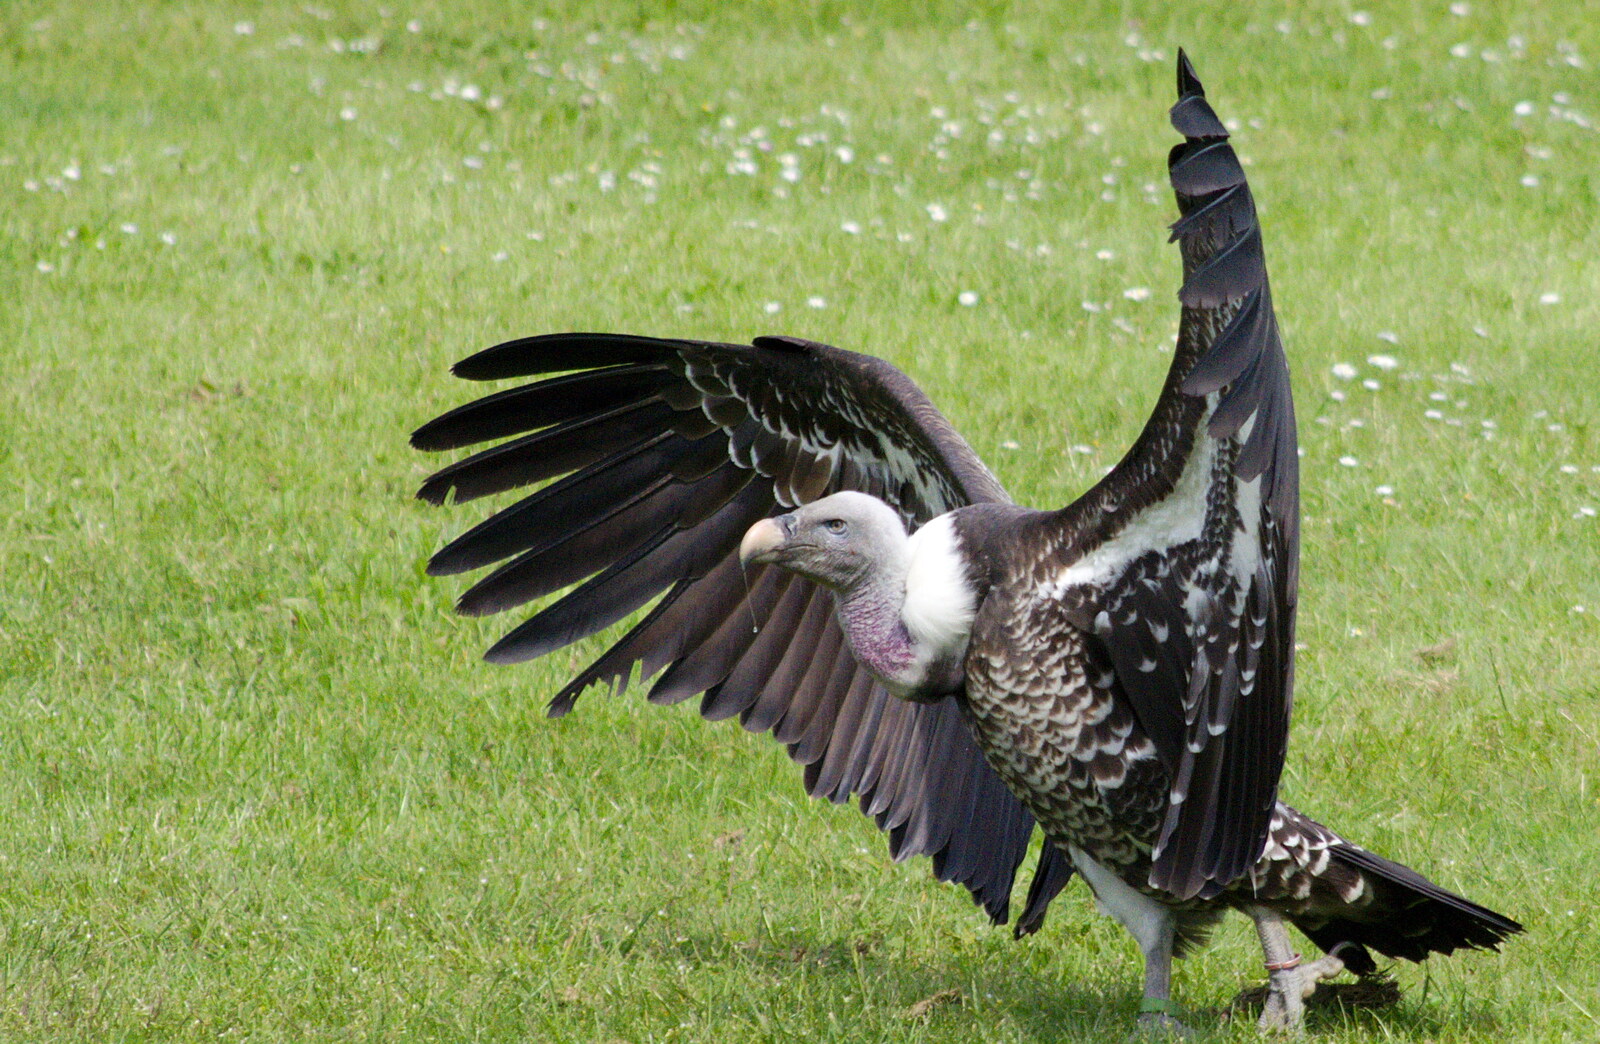 A Birthday Trip to the Zoo, Banham, Norfolk - 26th May 2014: A vulture roams around